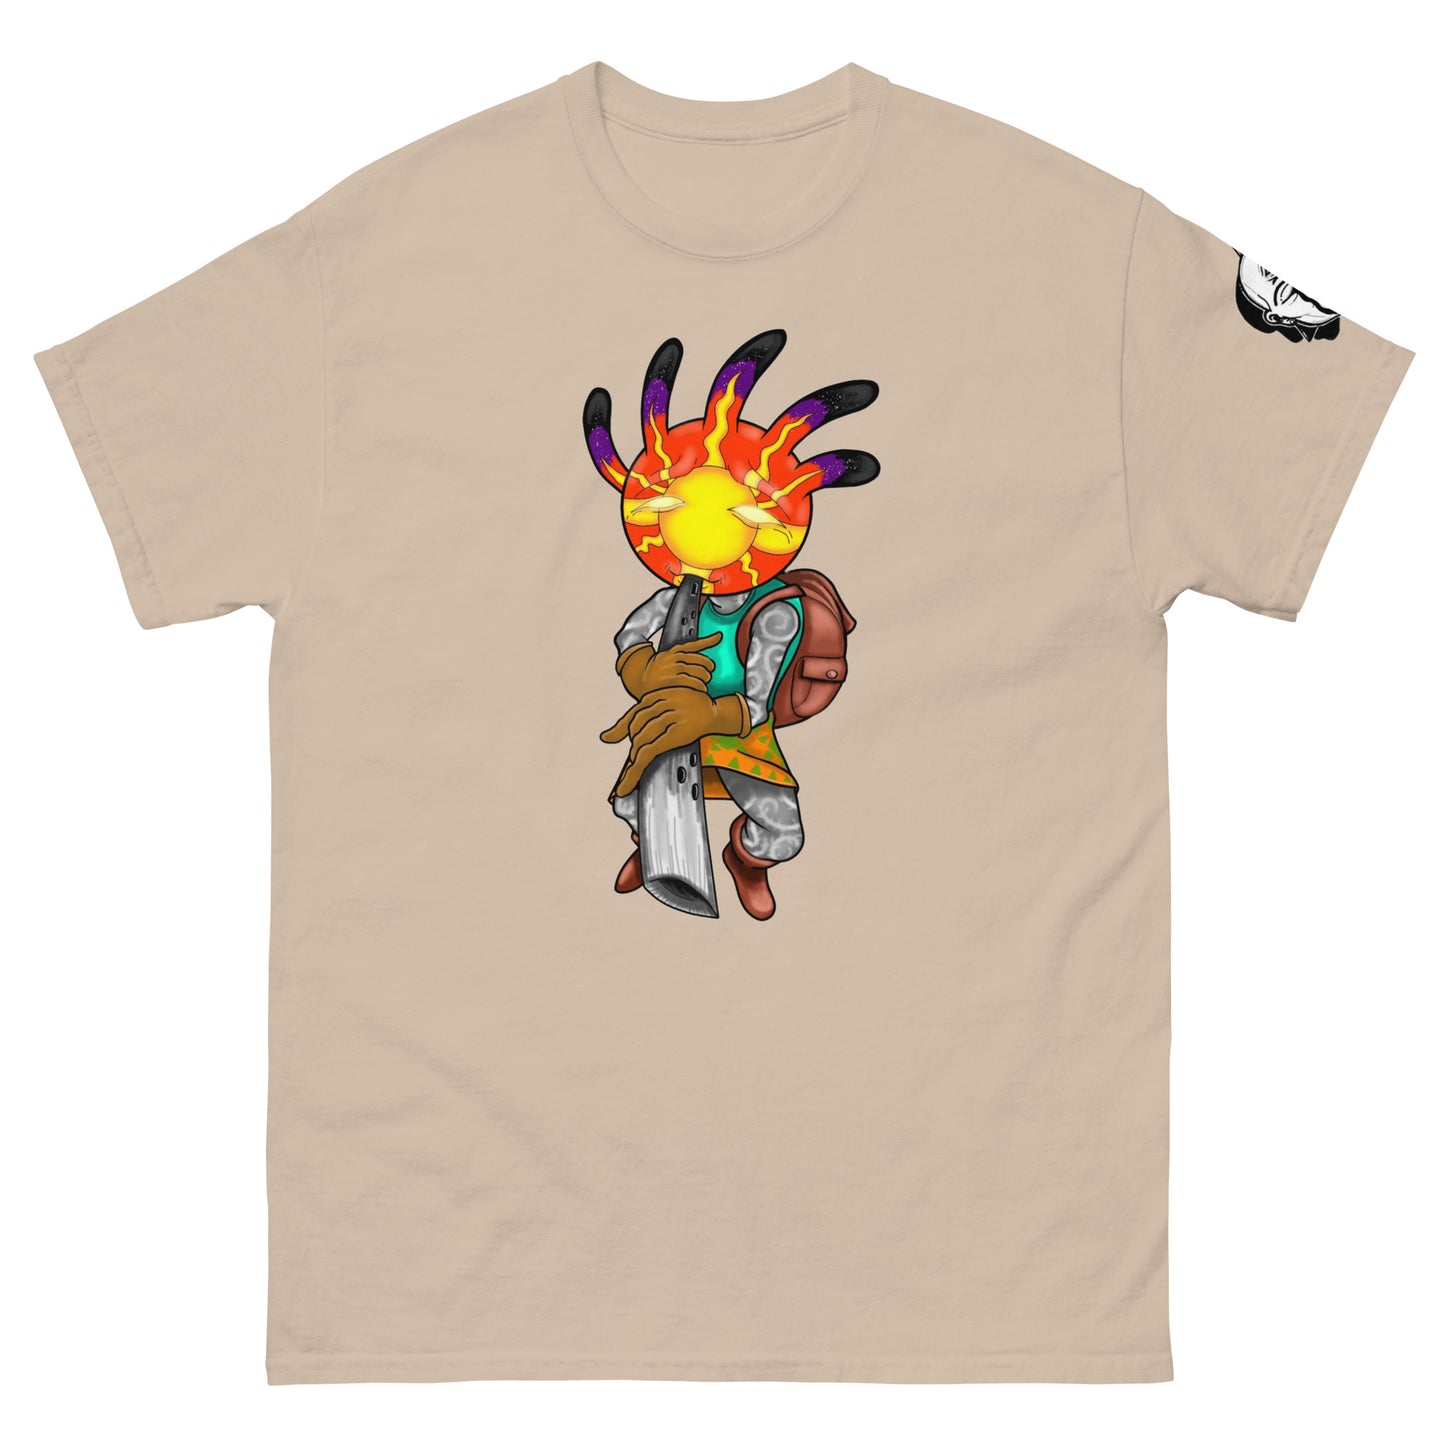 "KOKOPELLI" by INSPIRE x @reaper.renaissance 🎶 🏜️Designed for @renaissance_and_rendezvous.  Kokopelli, Native American, Native Inspired, Little People, Little Person, Magic, Symbolism, Esoteric, Kiva, Rain-Maker, Money, Prosperity, Inspire, FXBG, Fredericksburg, Renaissance, Rendezvous, Fertility, Music, Clothing, Swag, Cool,  Gifts, Dope, One of a kind, unique, tan, sand, nature, storms, wind maker, 